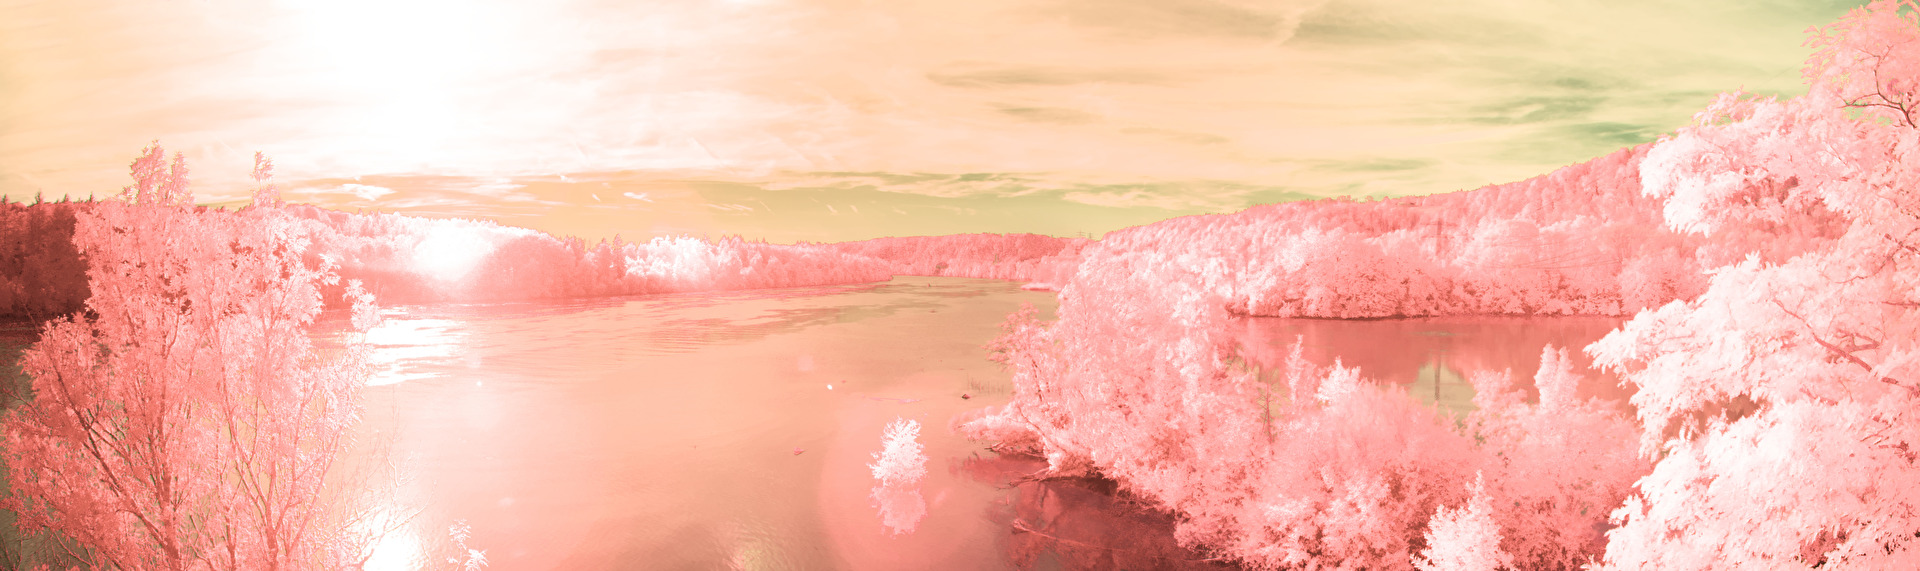 #Landschaft - welcome to the pink planet